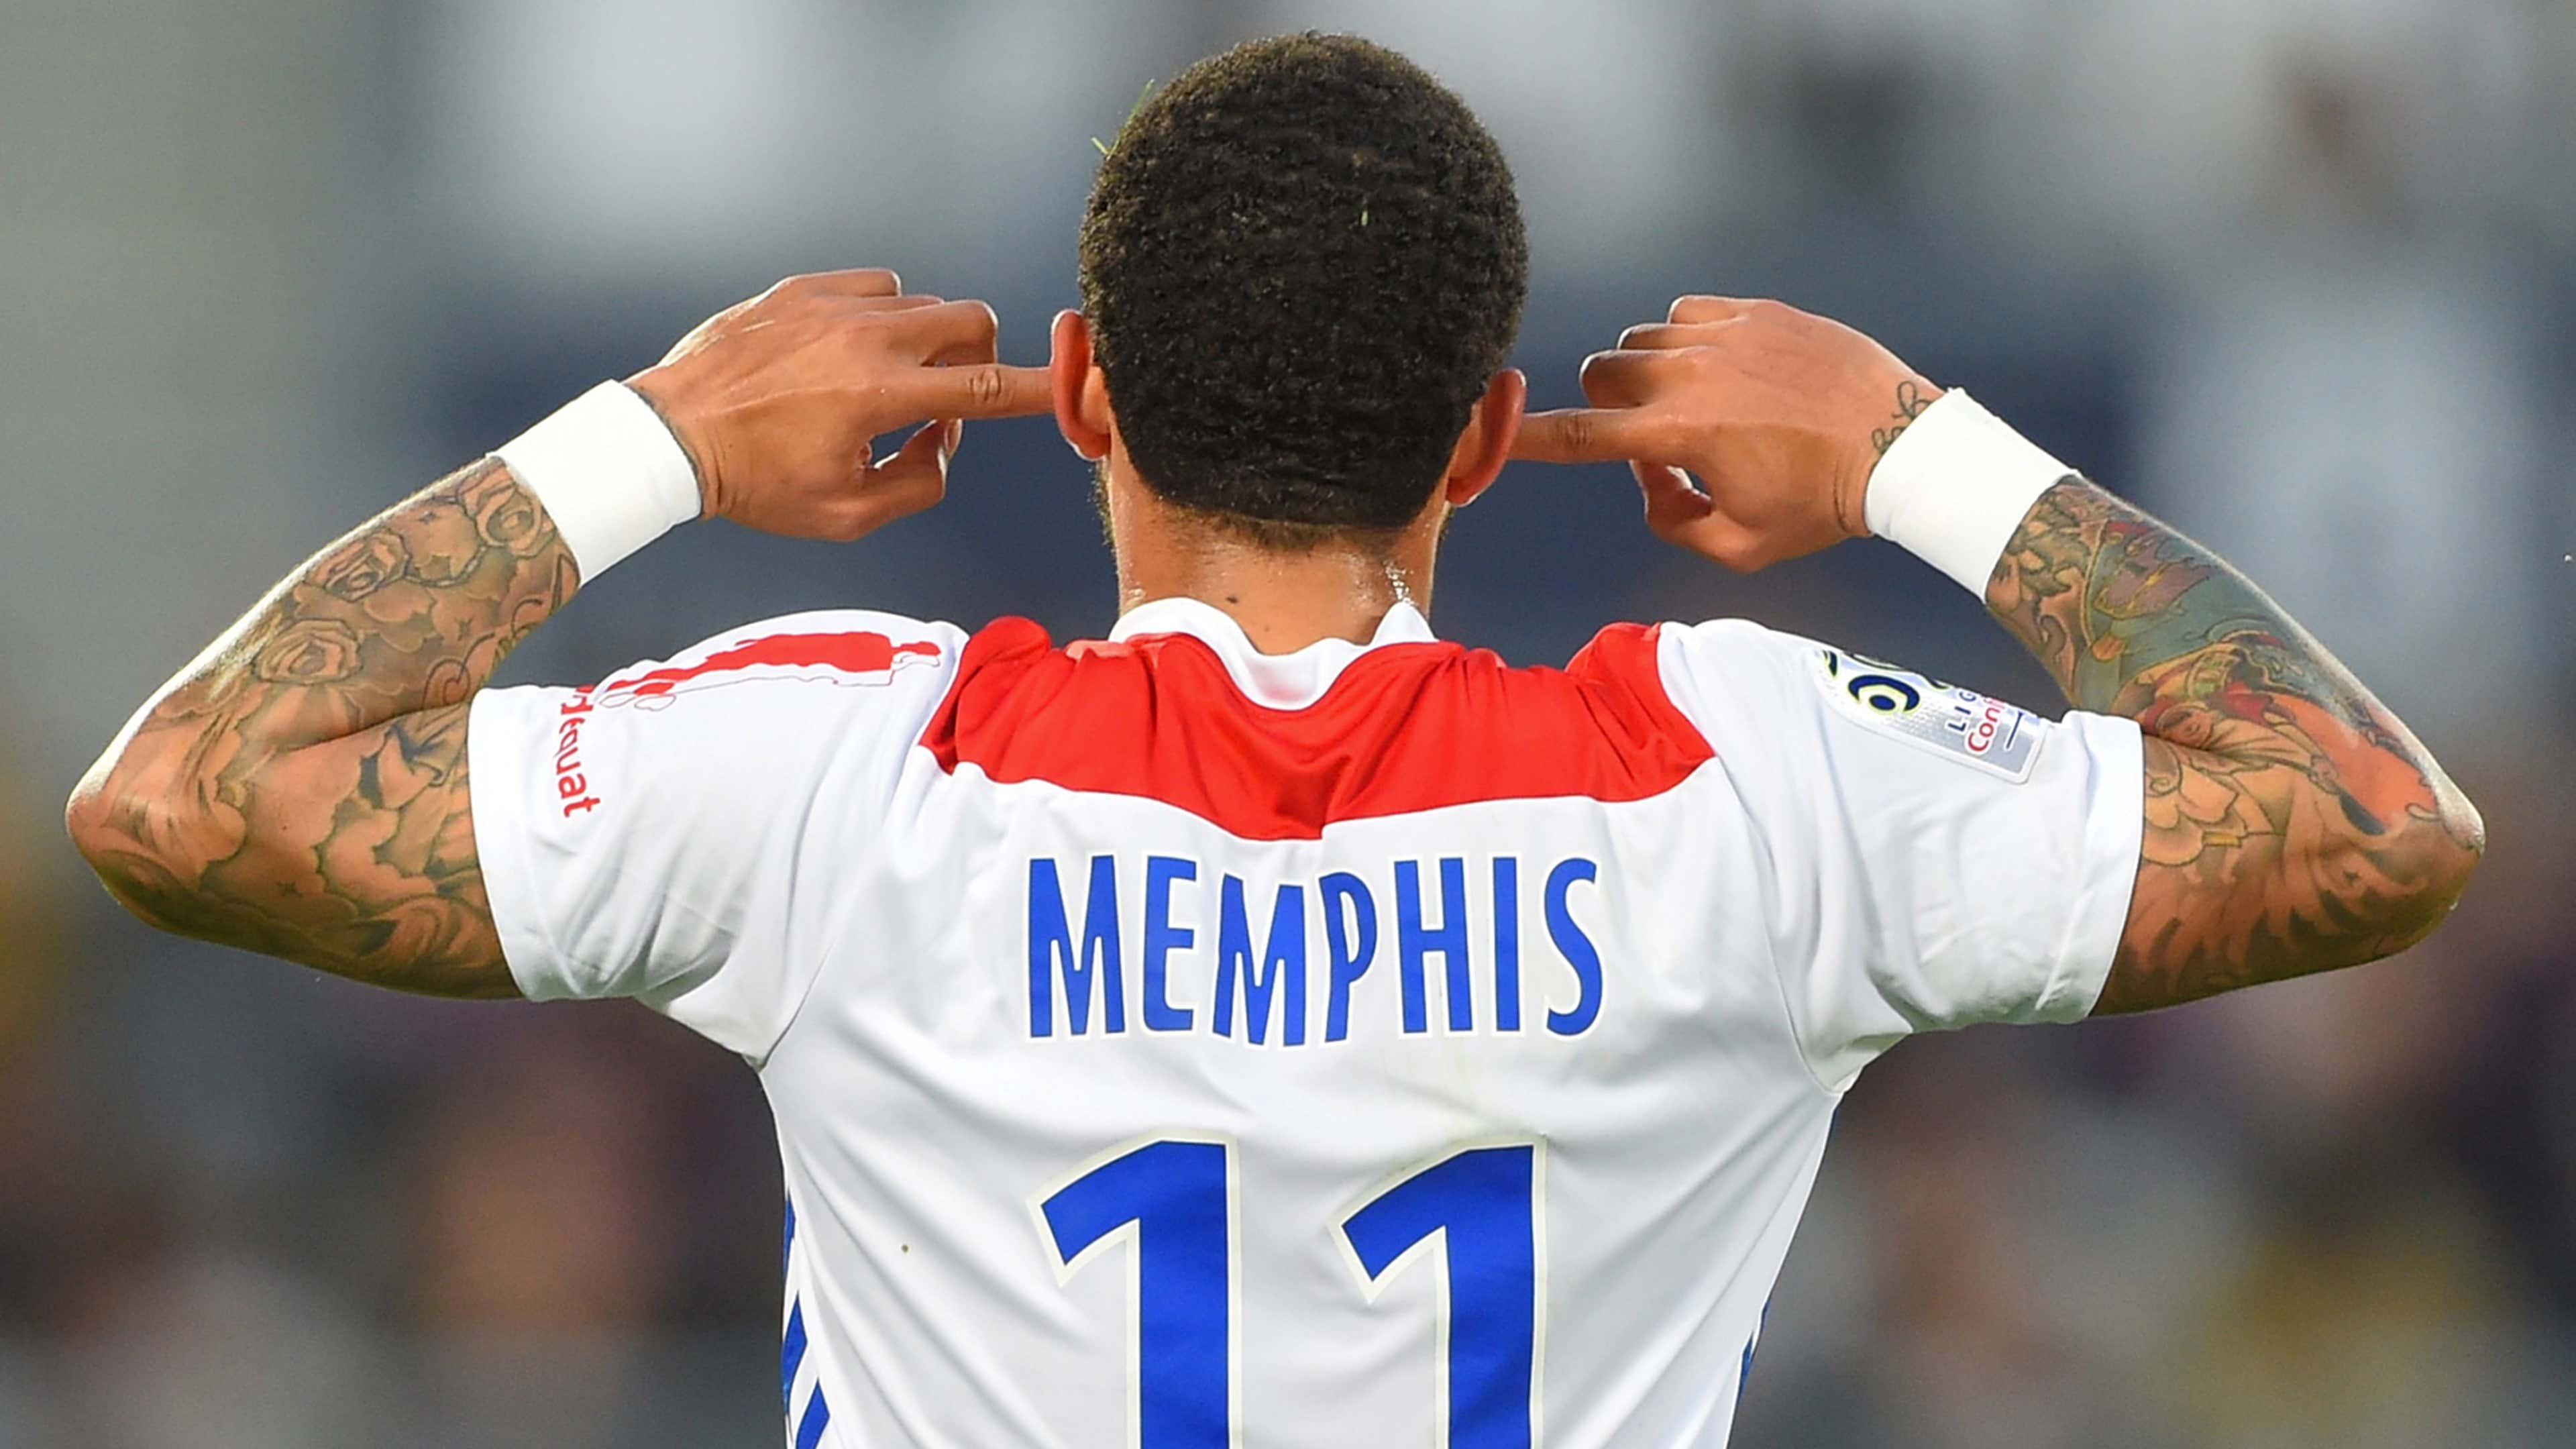 Memphis Depay: 'My talent saved me' - Lyon star opens up after revealing he  used to sell weed on the street as a kid